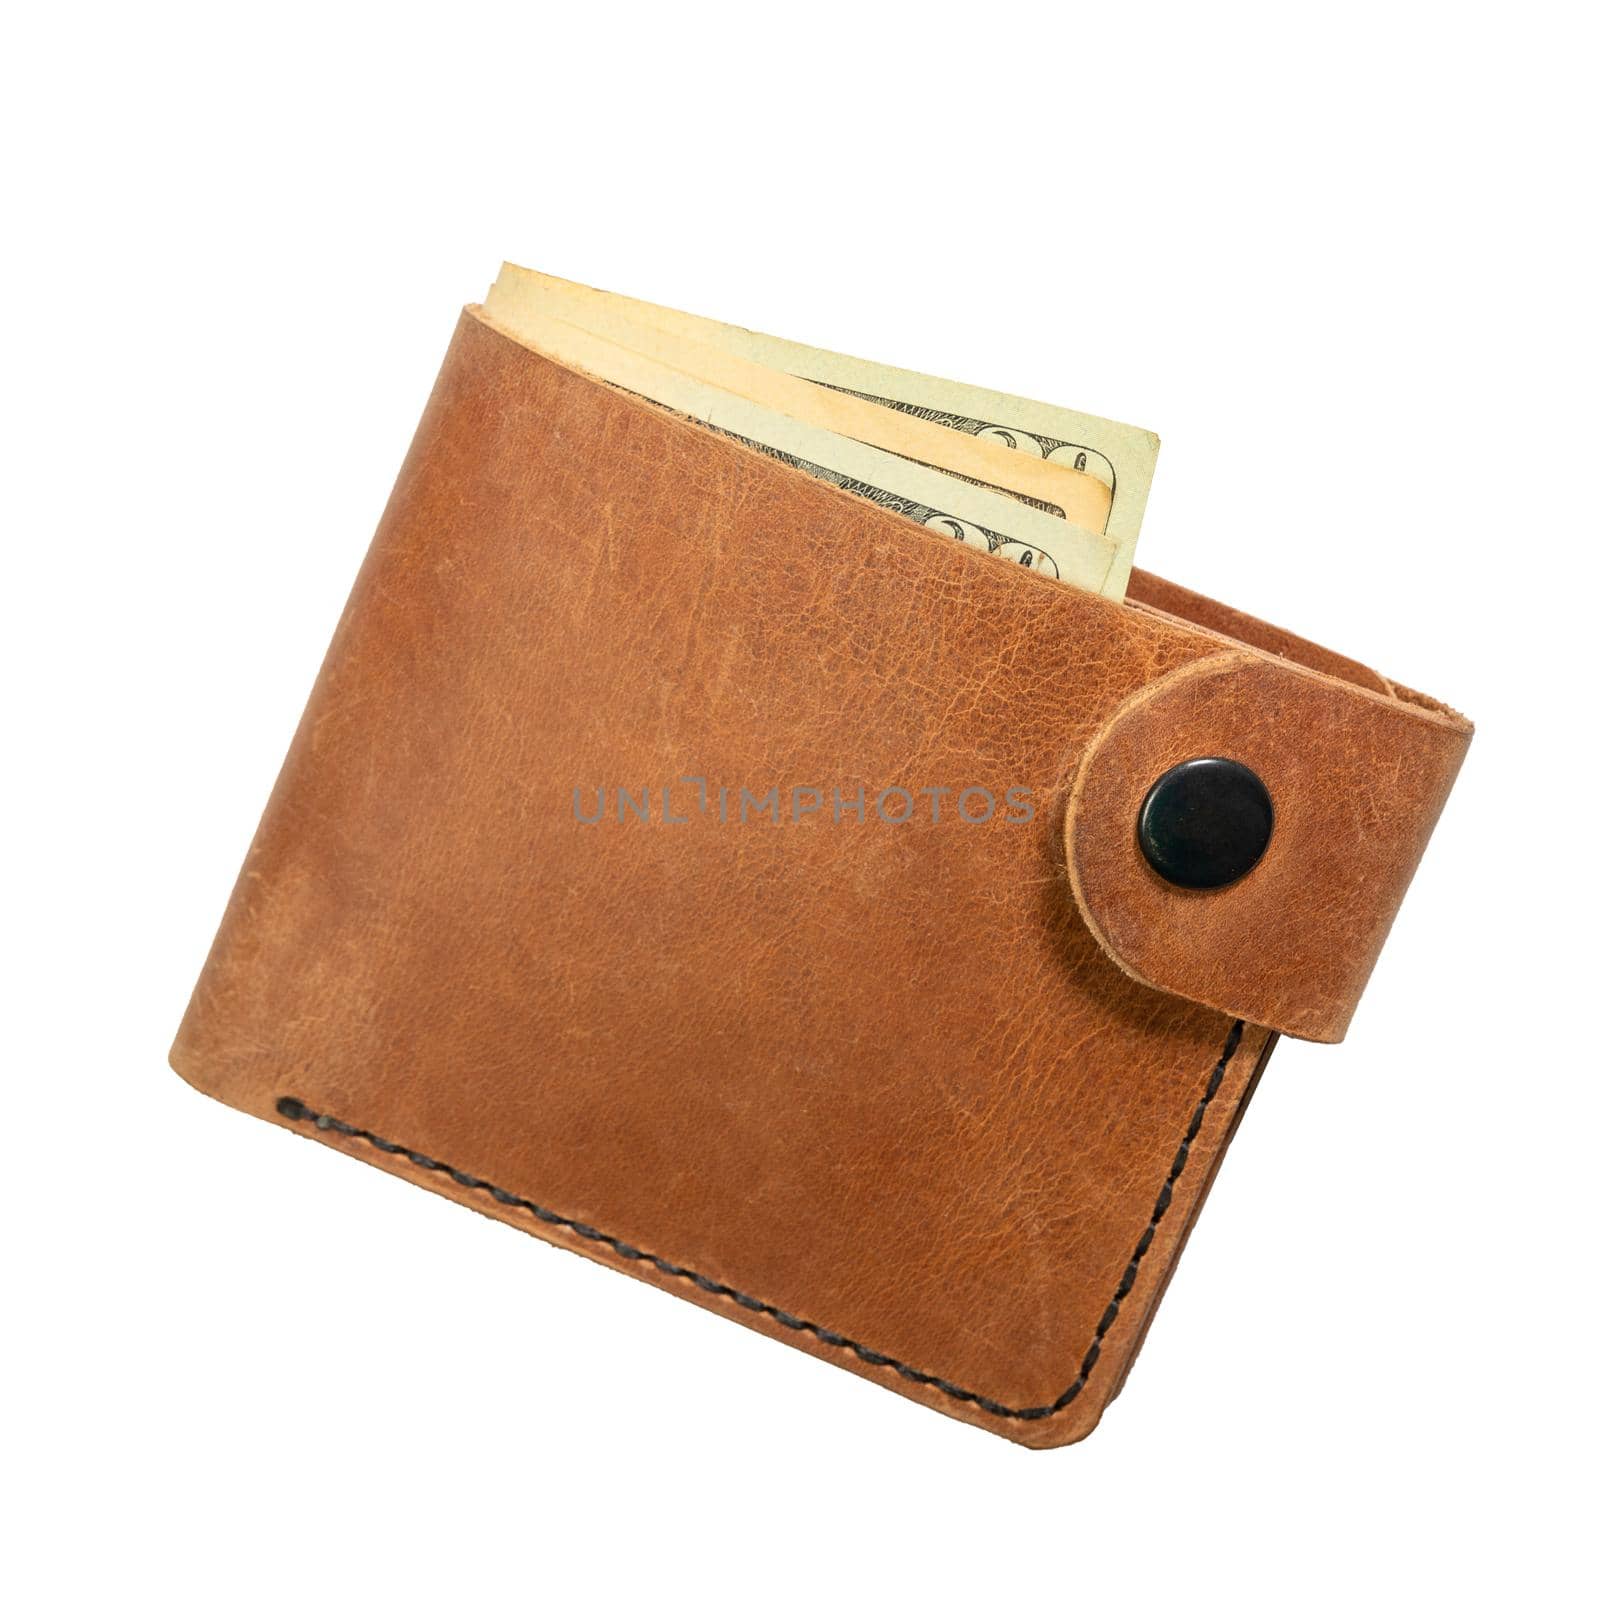 Open brown mens wallet with money and credit cards isolated on a white background close-up